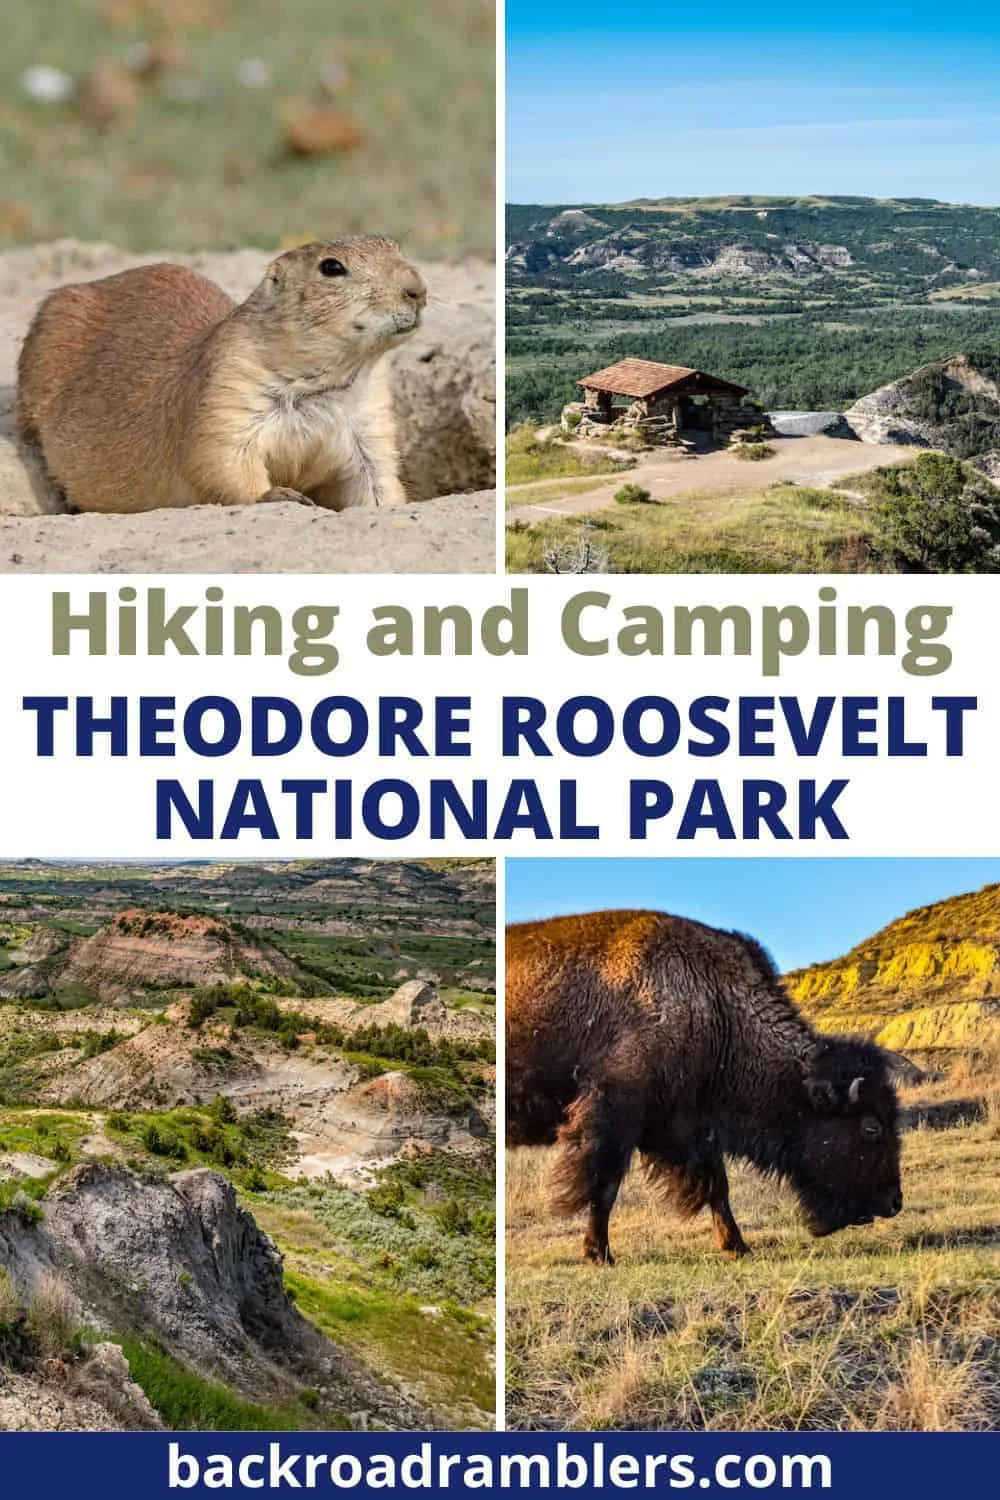 A collage of photos featuring animals and viewpoints in Theodore Roosevelt National park. Text overlay: Hiking and Camping in Theodore Roosevelt National Park.